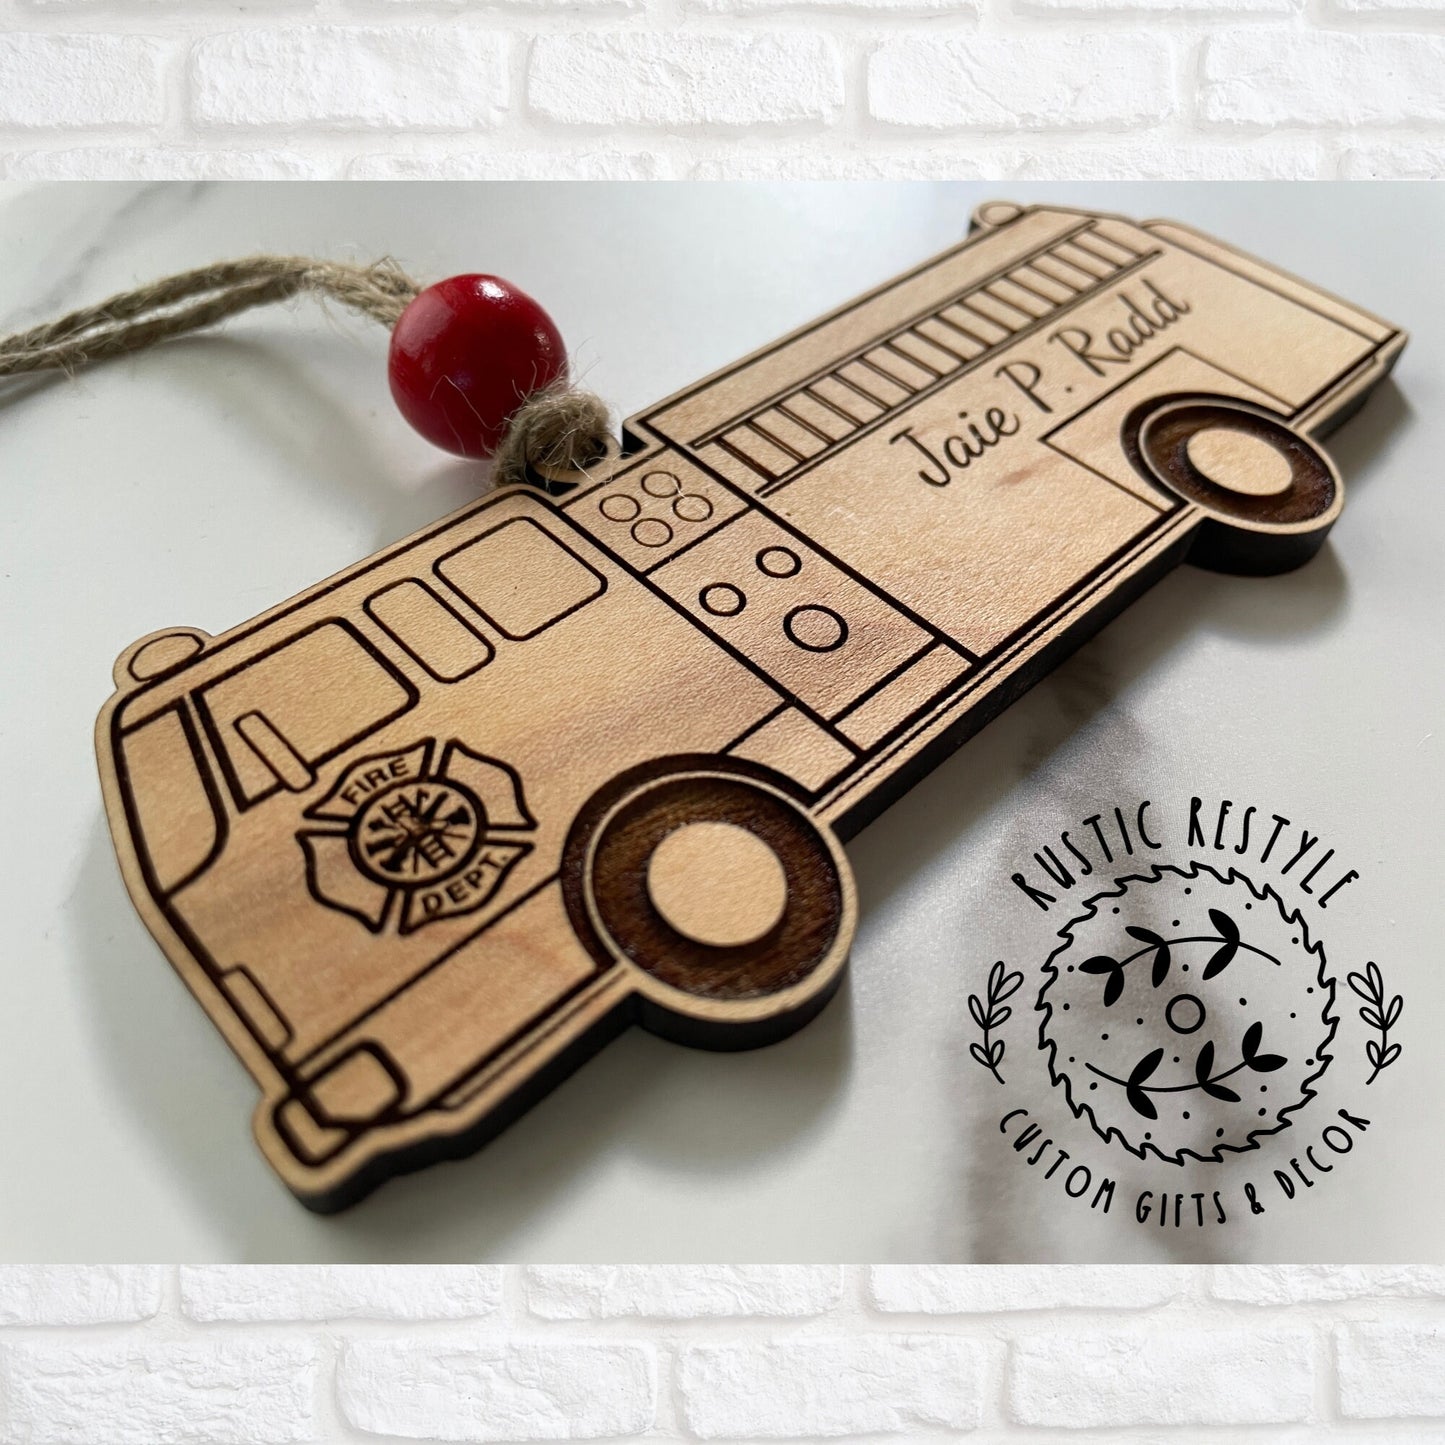 Firefighter Ornament, Personalized Fire Truck or Fire Jacket Christmas tree ornament